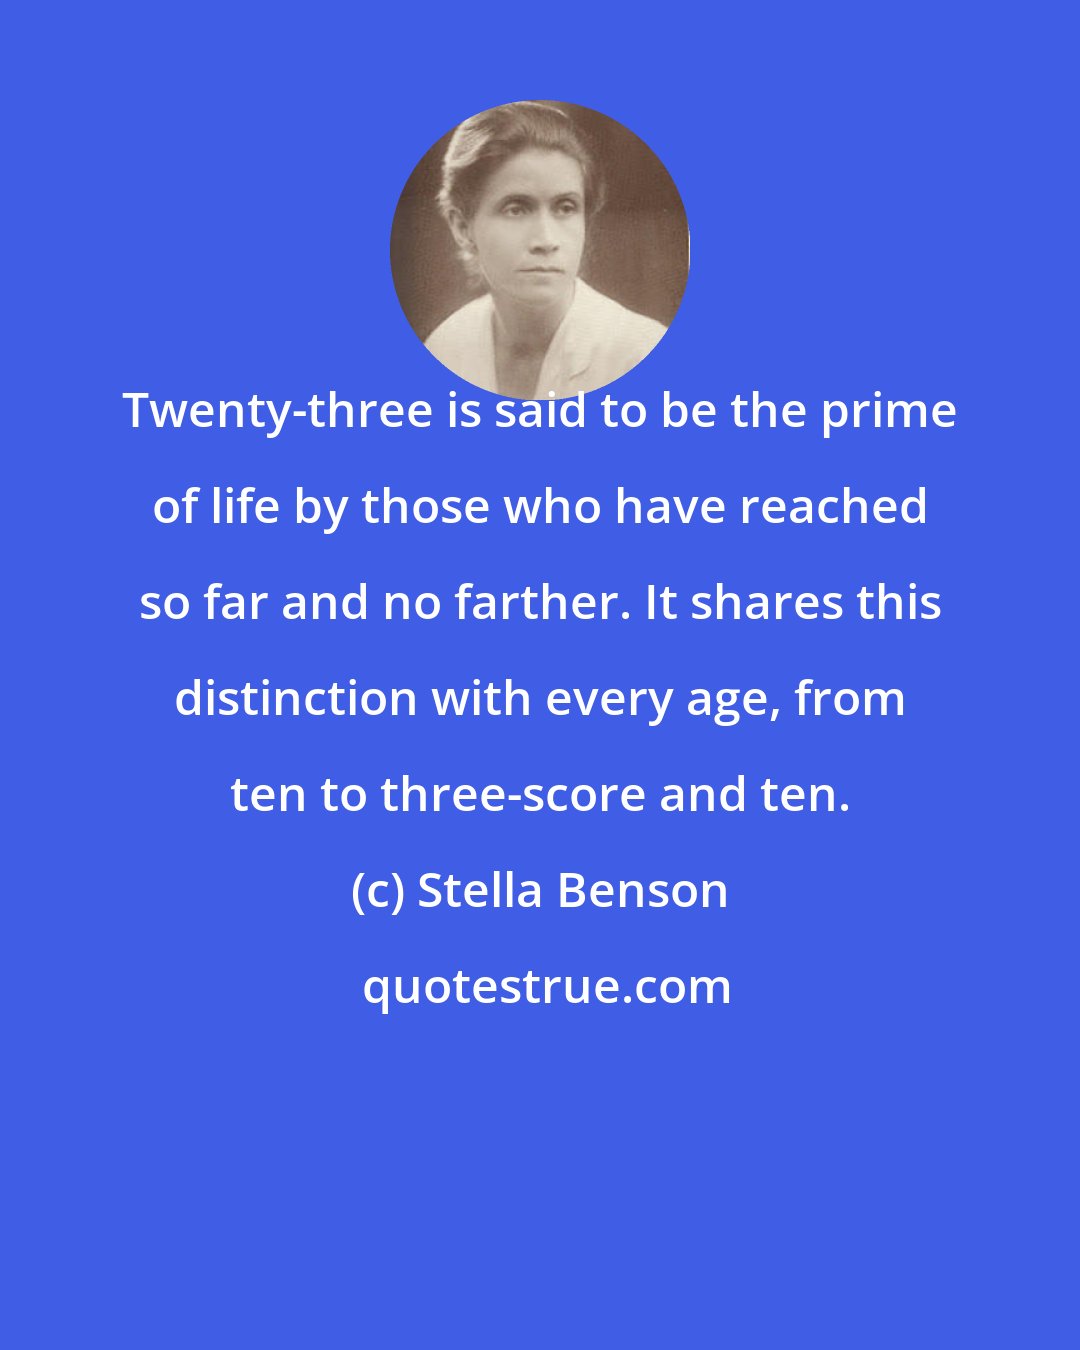 Stella Benson: Twenty-three is said to be the prime of life by those who have reached so far and no farther. It shares this distinction with every age, from ten to three-score and ten.